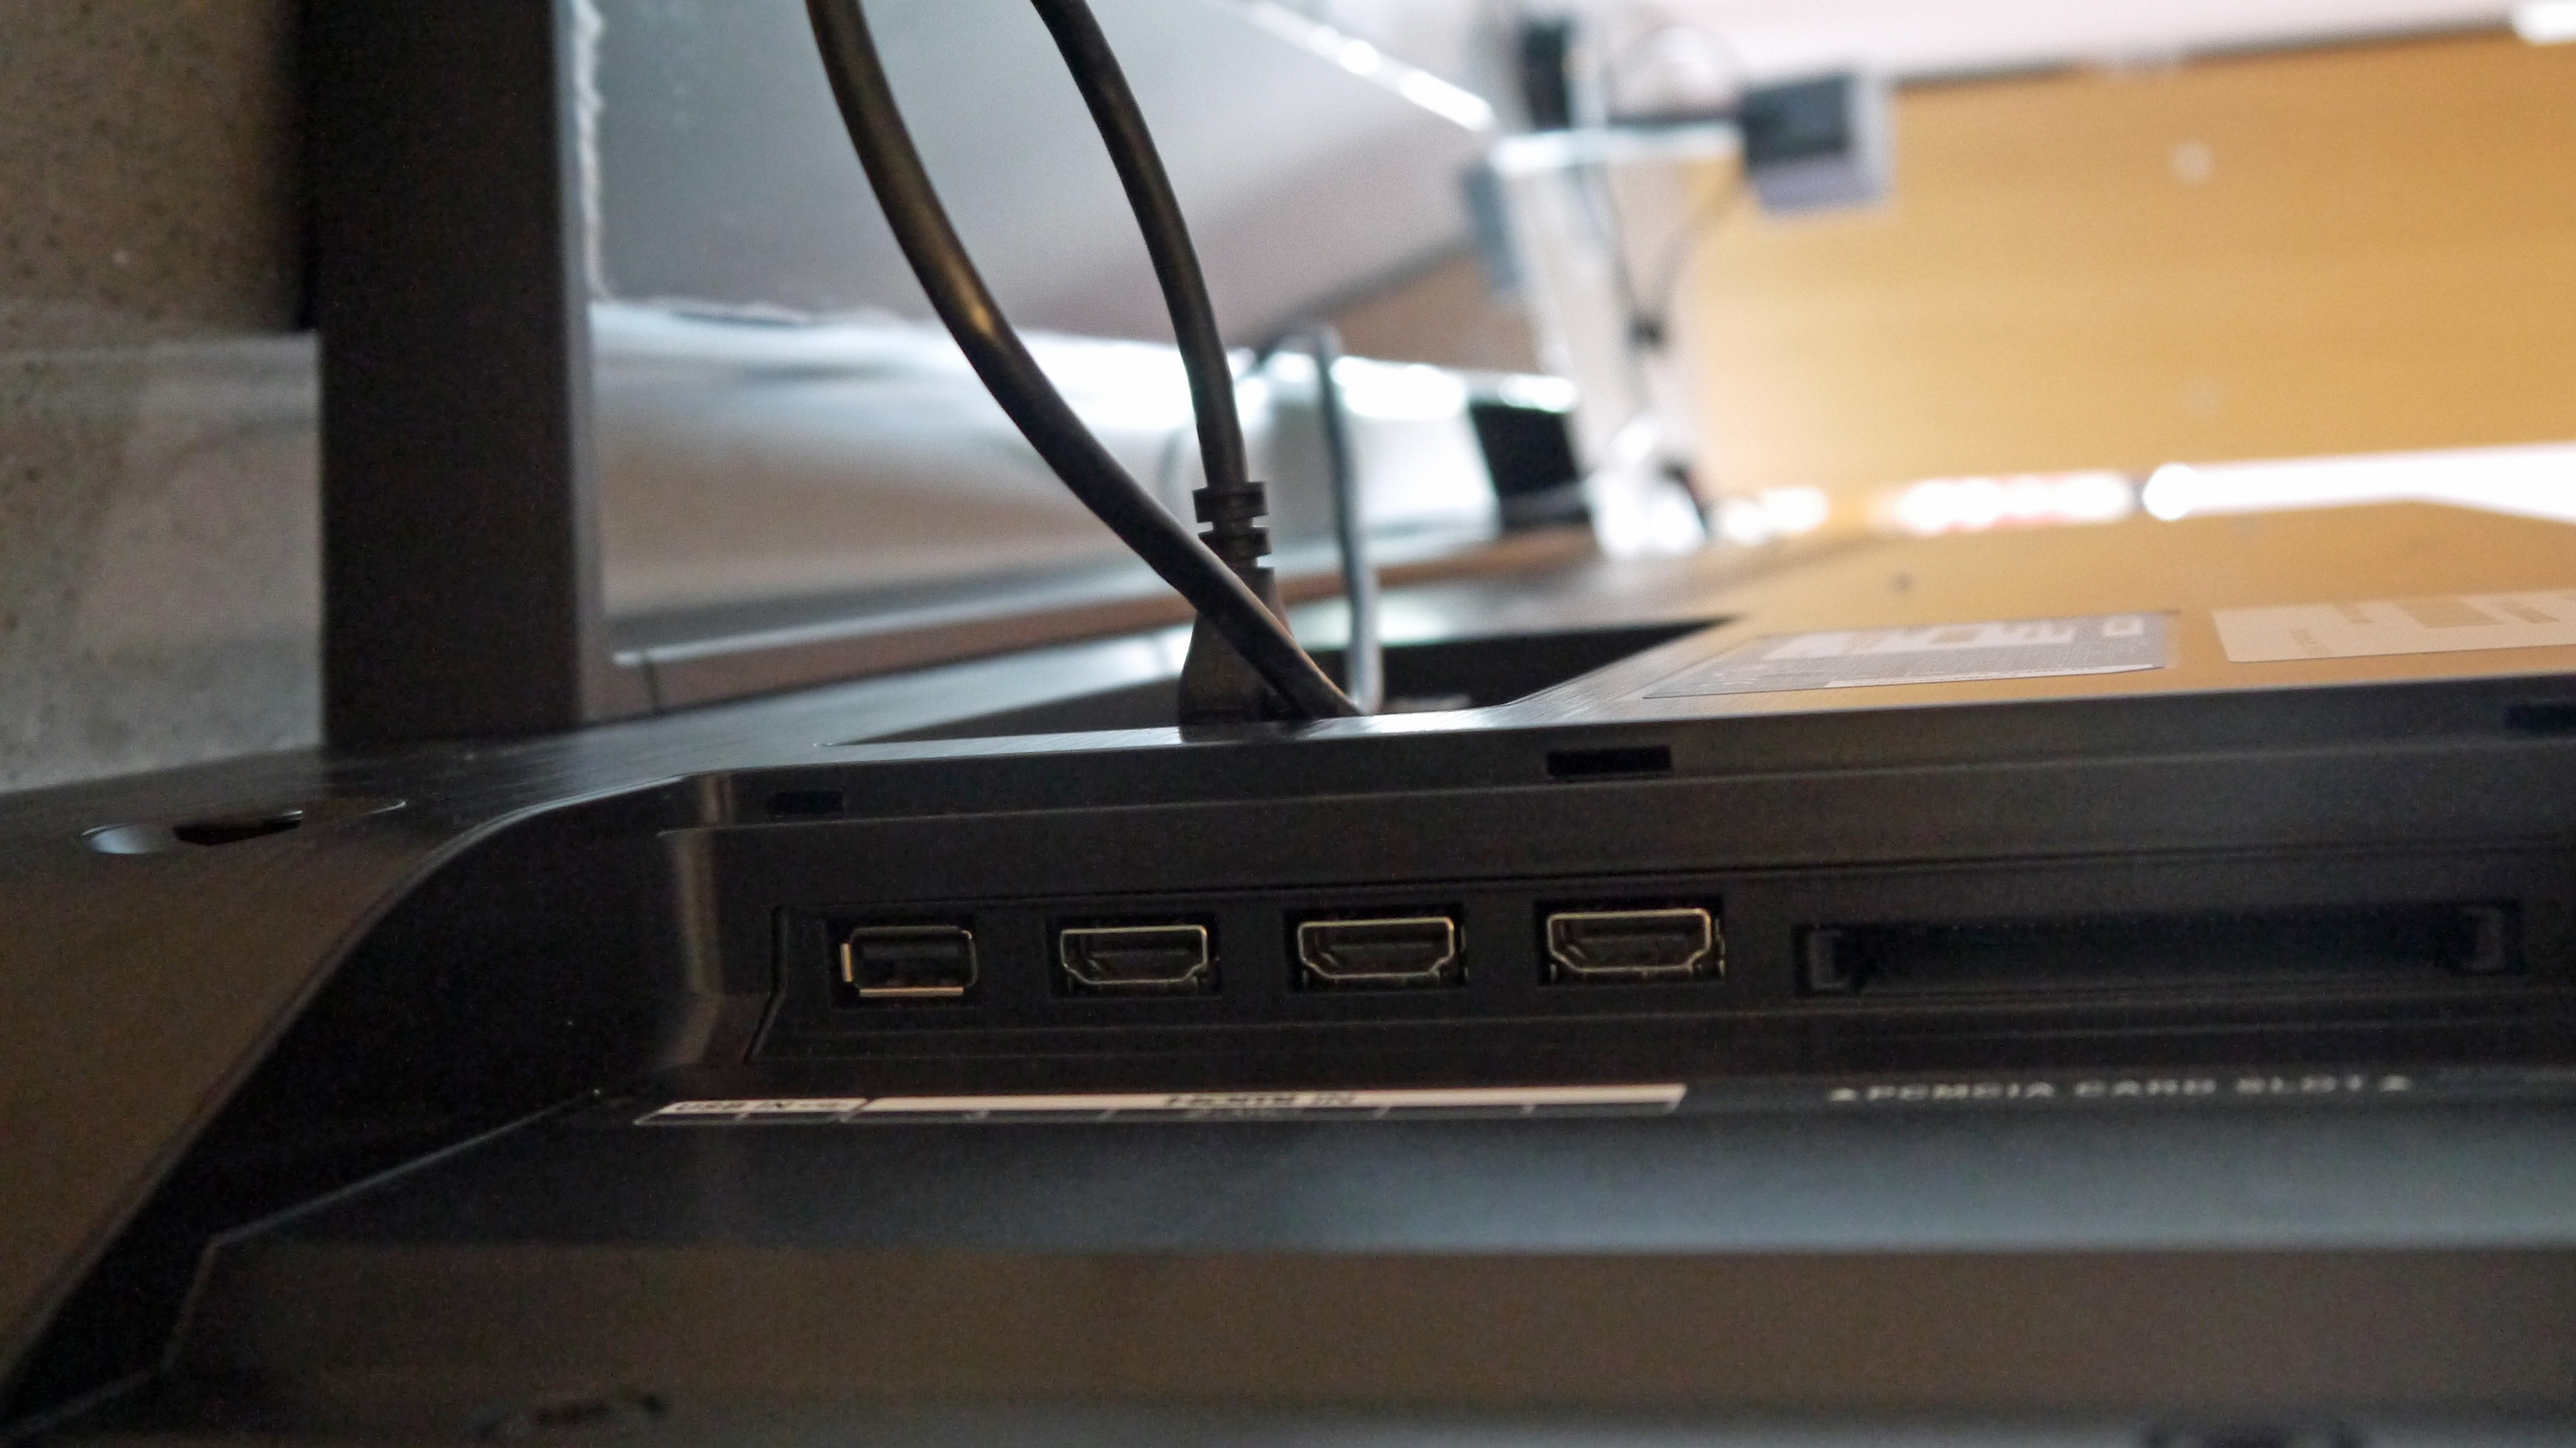 Those HDMI ports at the back may need some attention too (Image Credit: TechRadar)